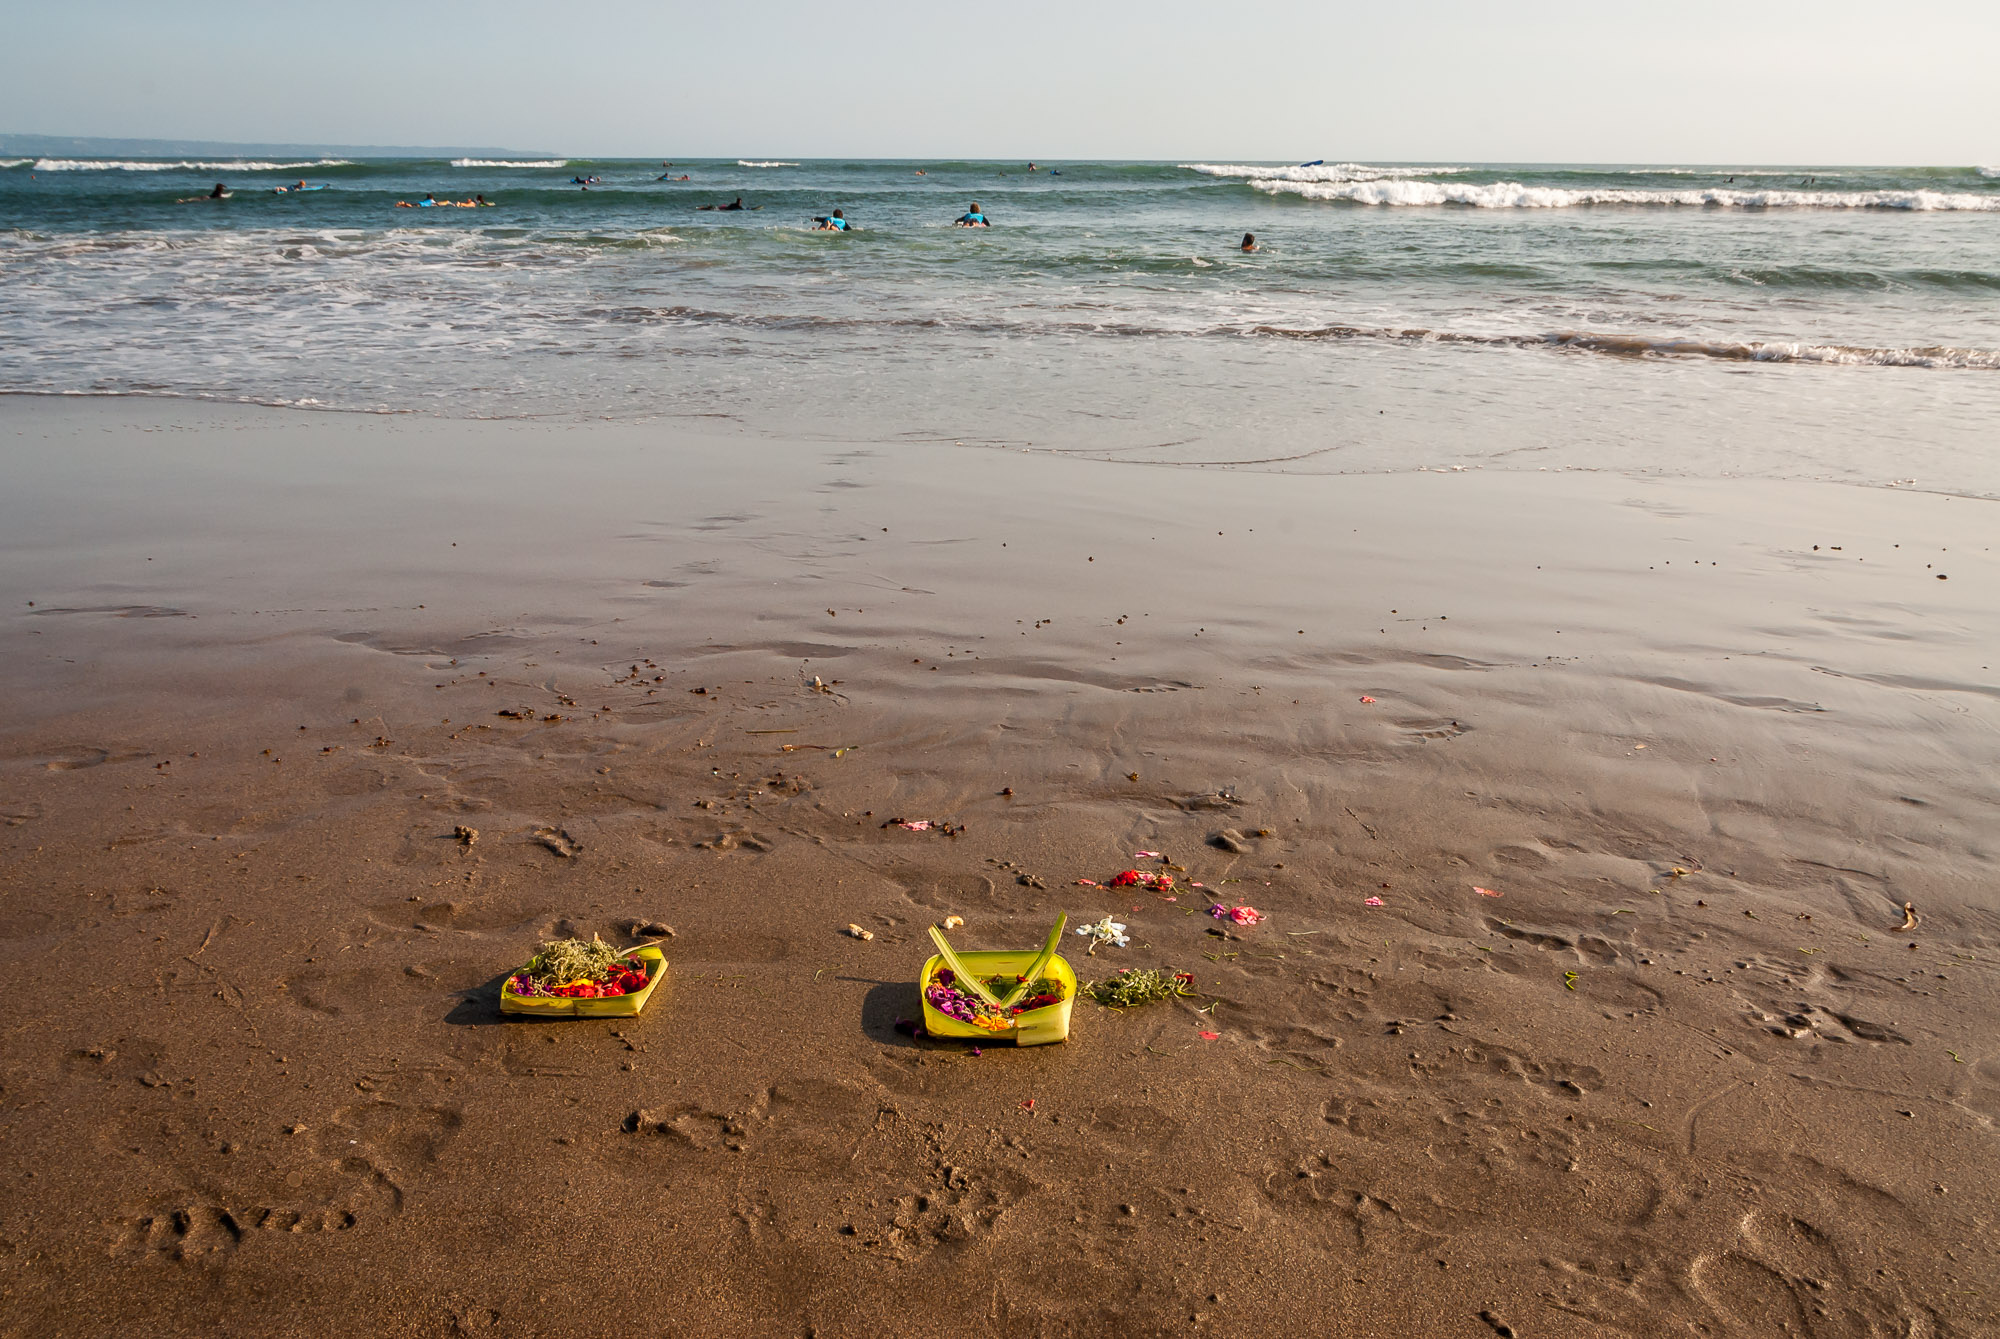 Balinese offerings on the beach